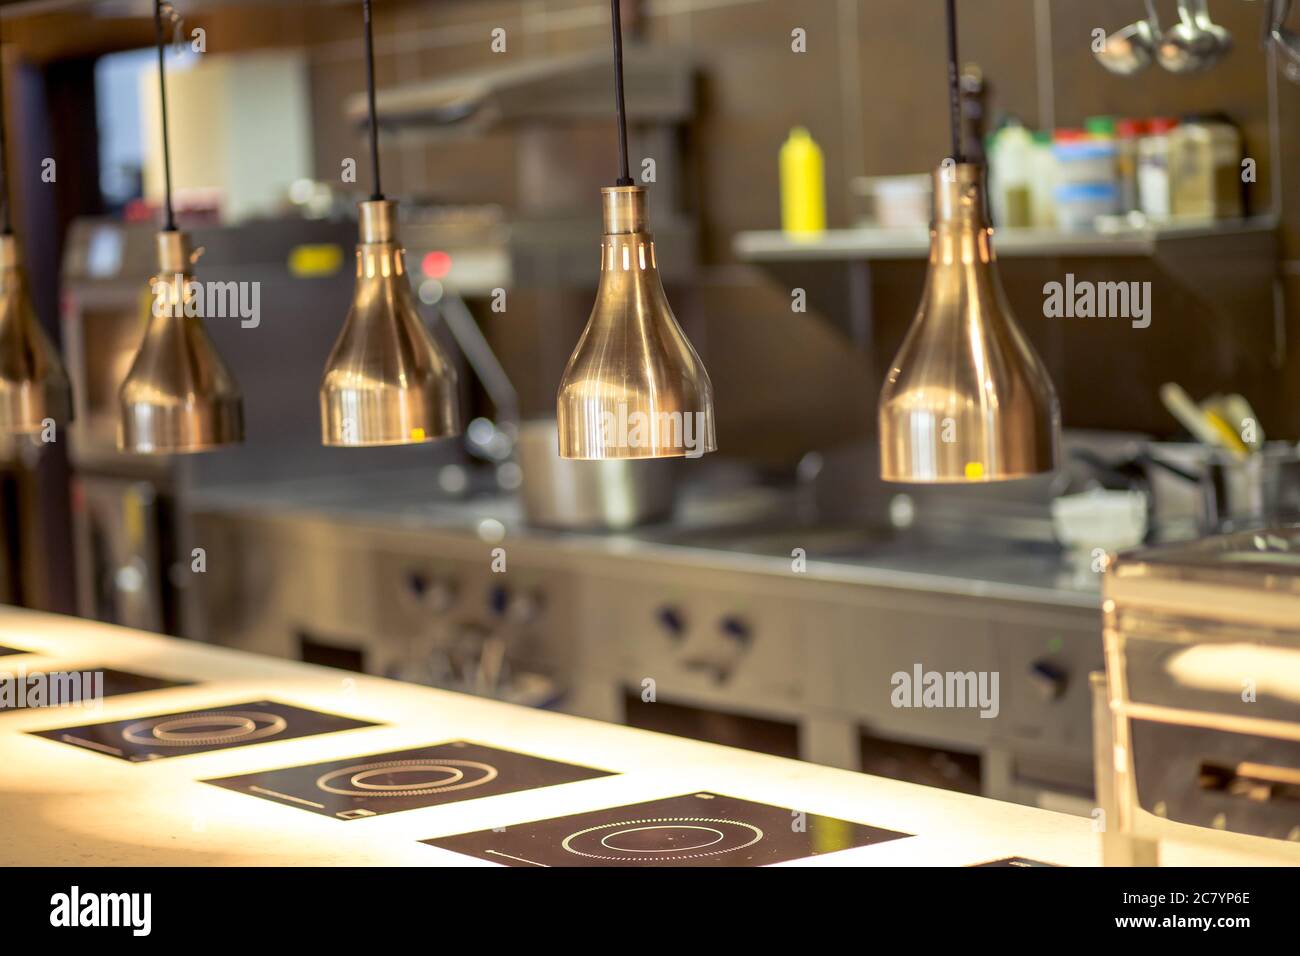 Work surface and kitchen equipment in professional kitchen Stock Photo